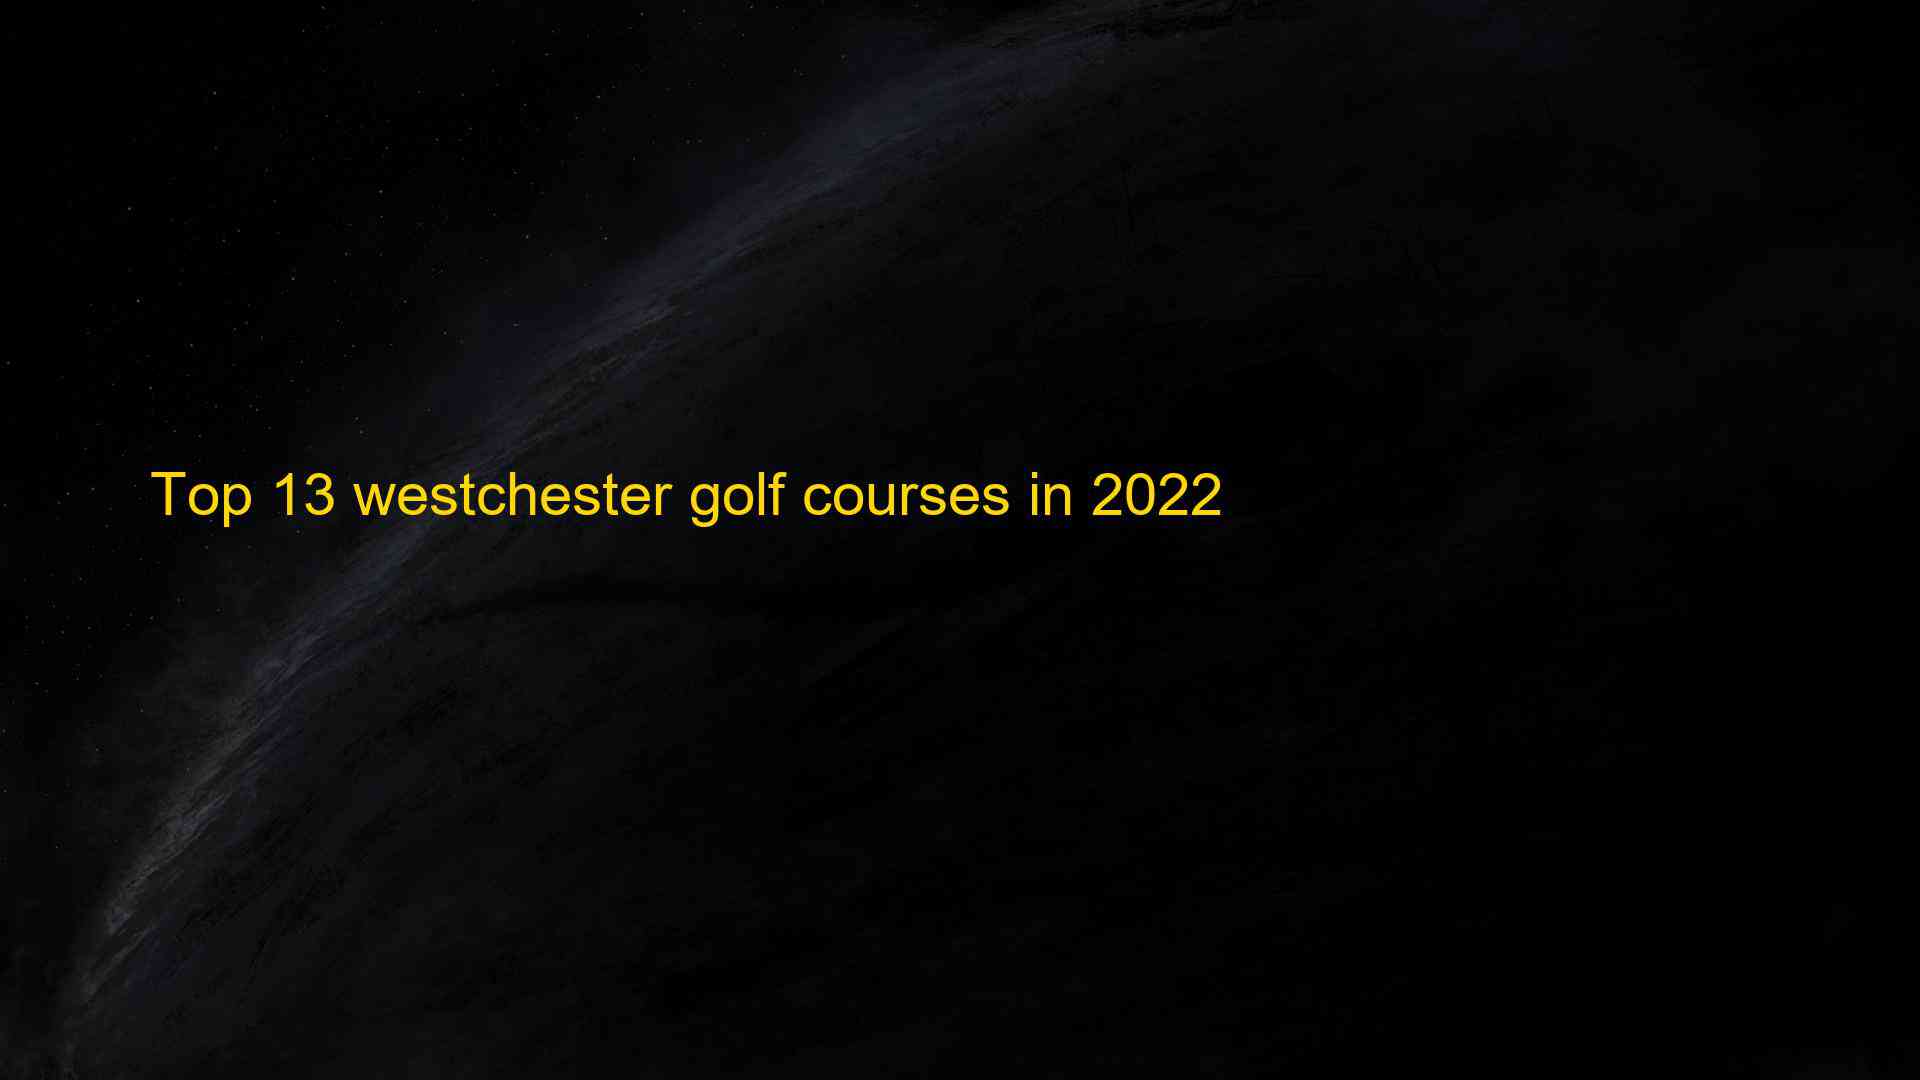 Top 13 westchester golf courses in 2022 1660889352